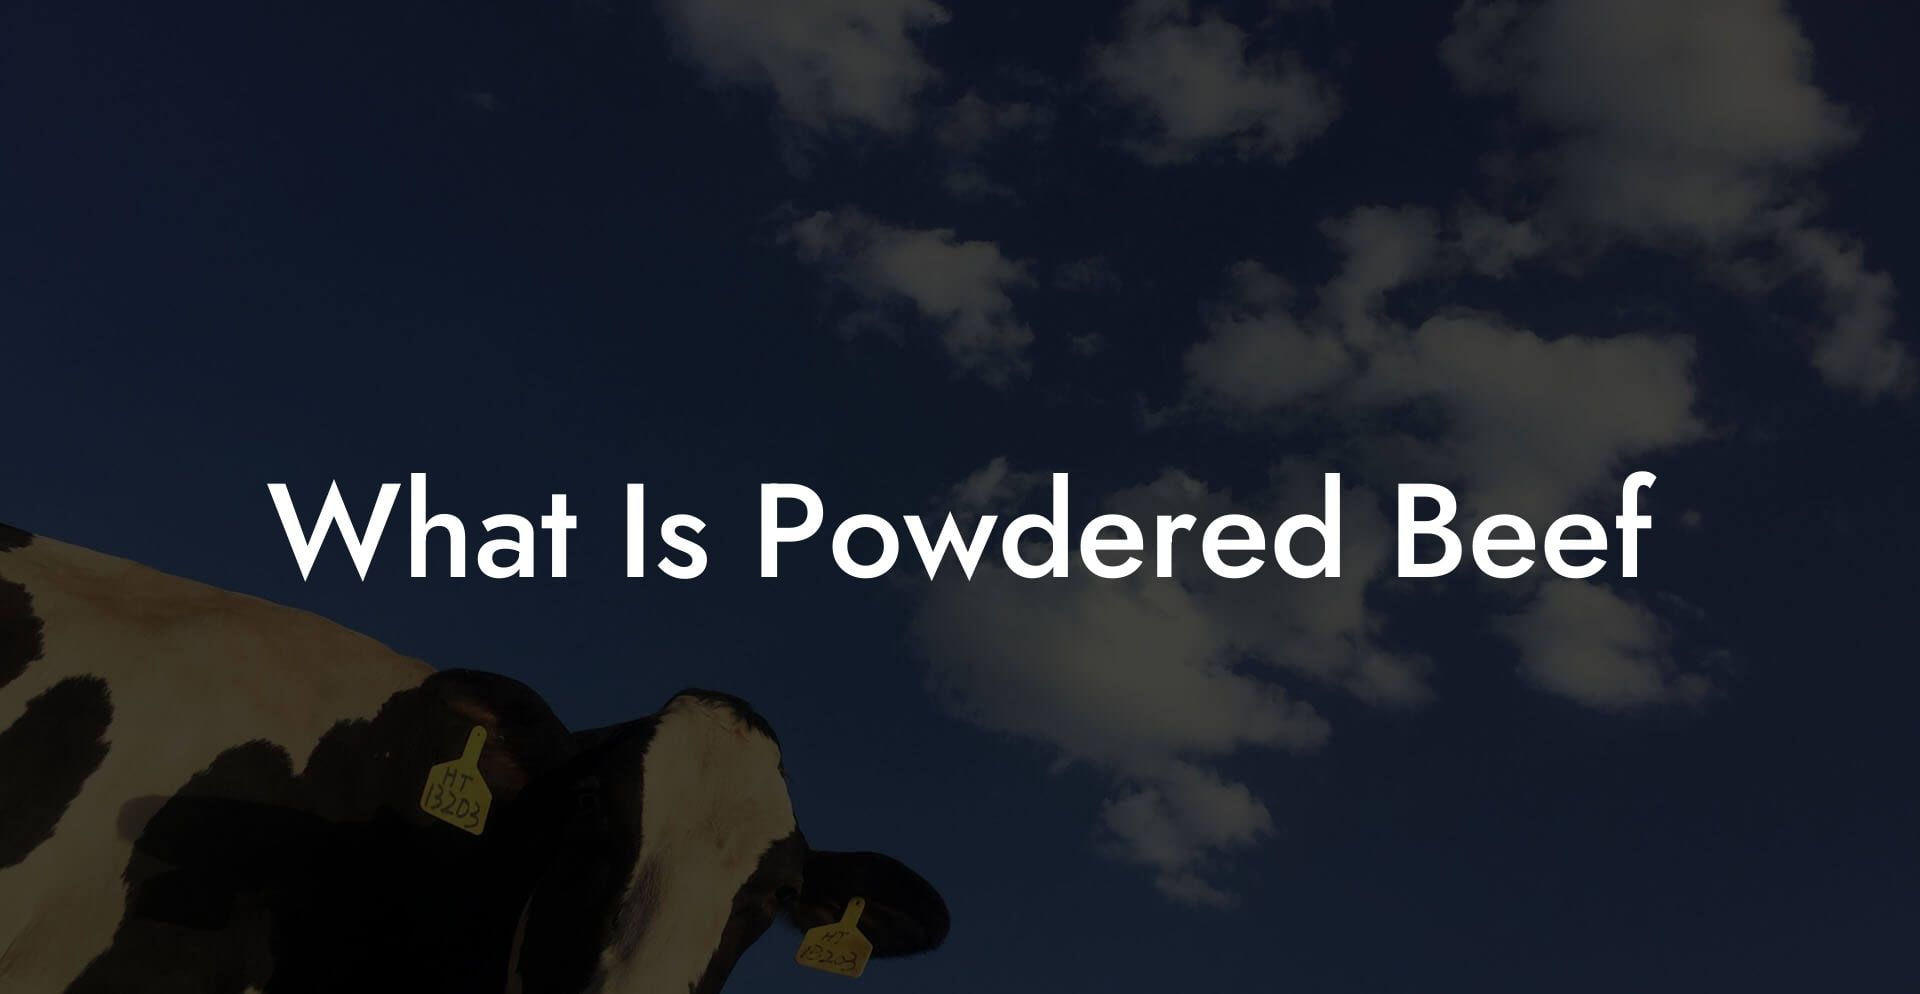 What Is Powdered Beef